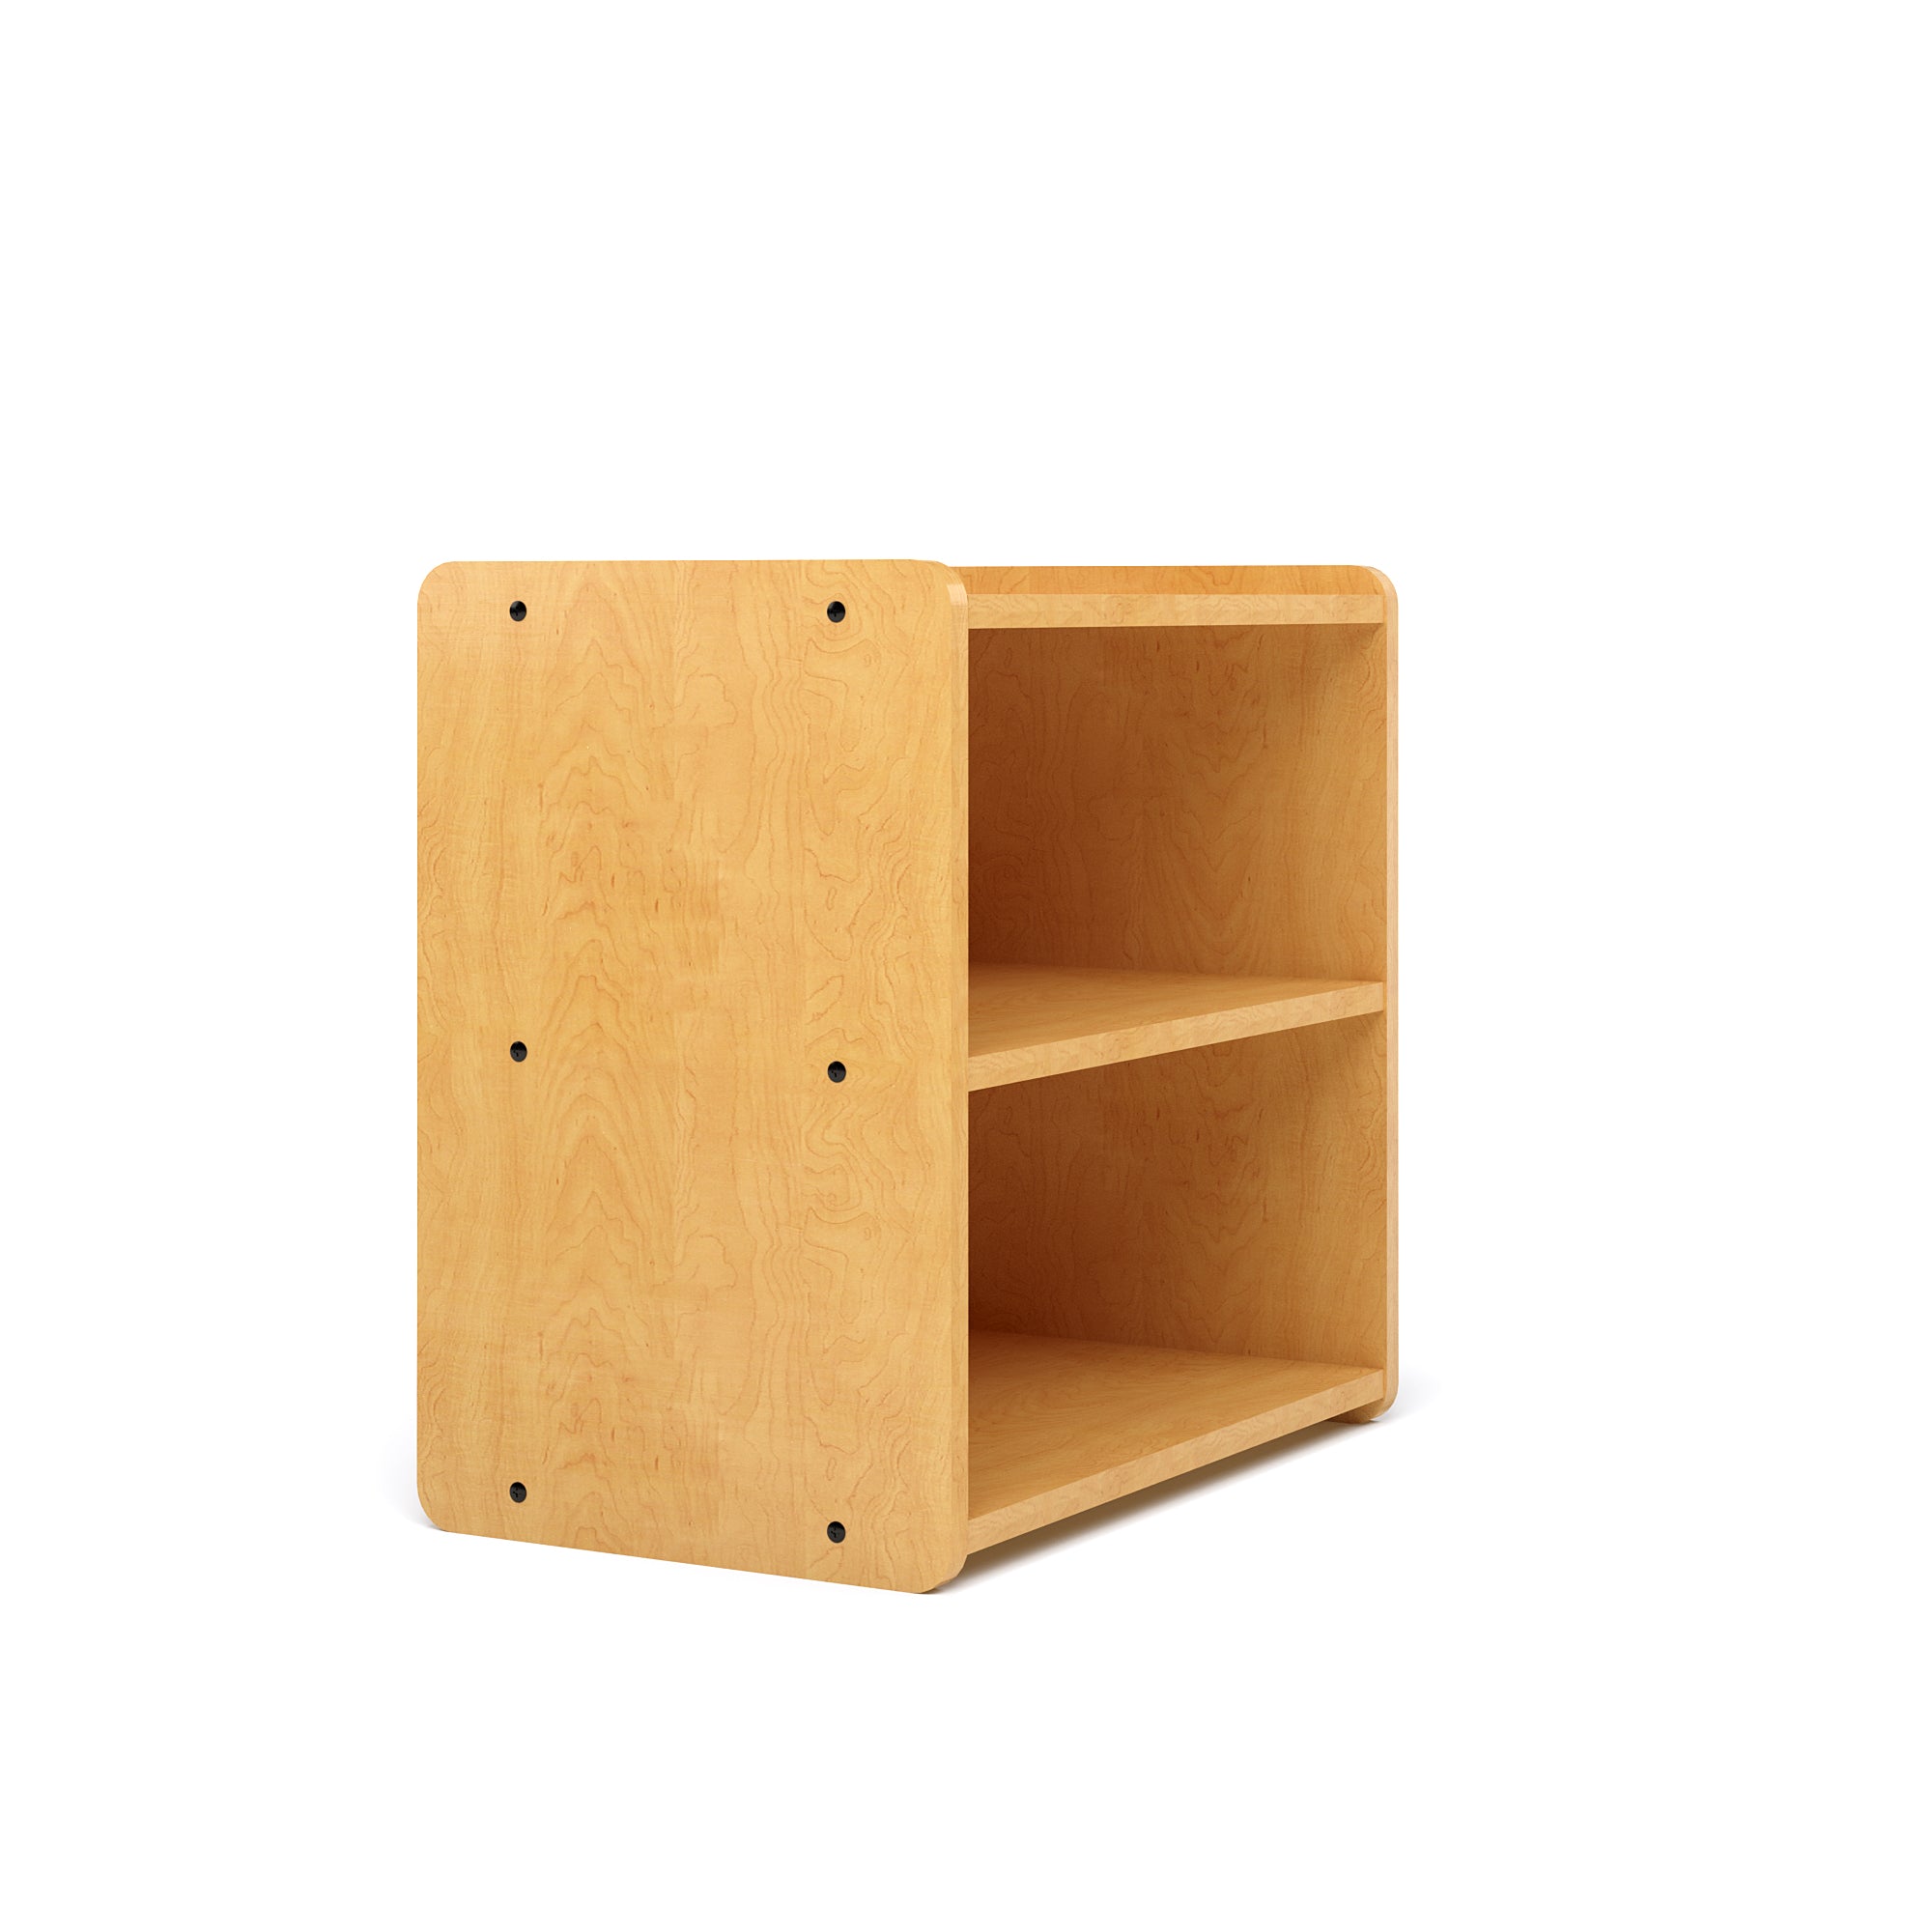 2-Shelf Storage Unit, 24H - Maple/Maple, Assembly Required by Tot Mate